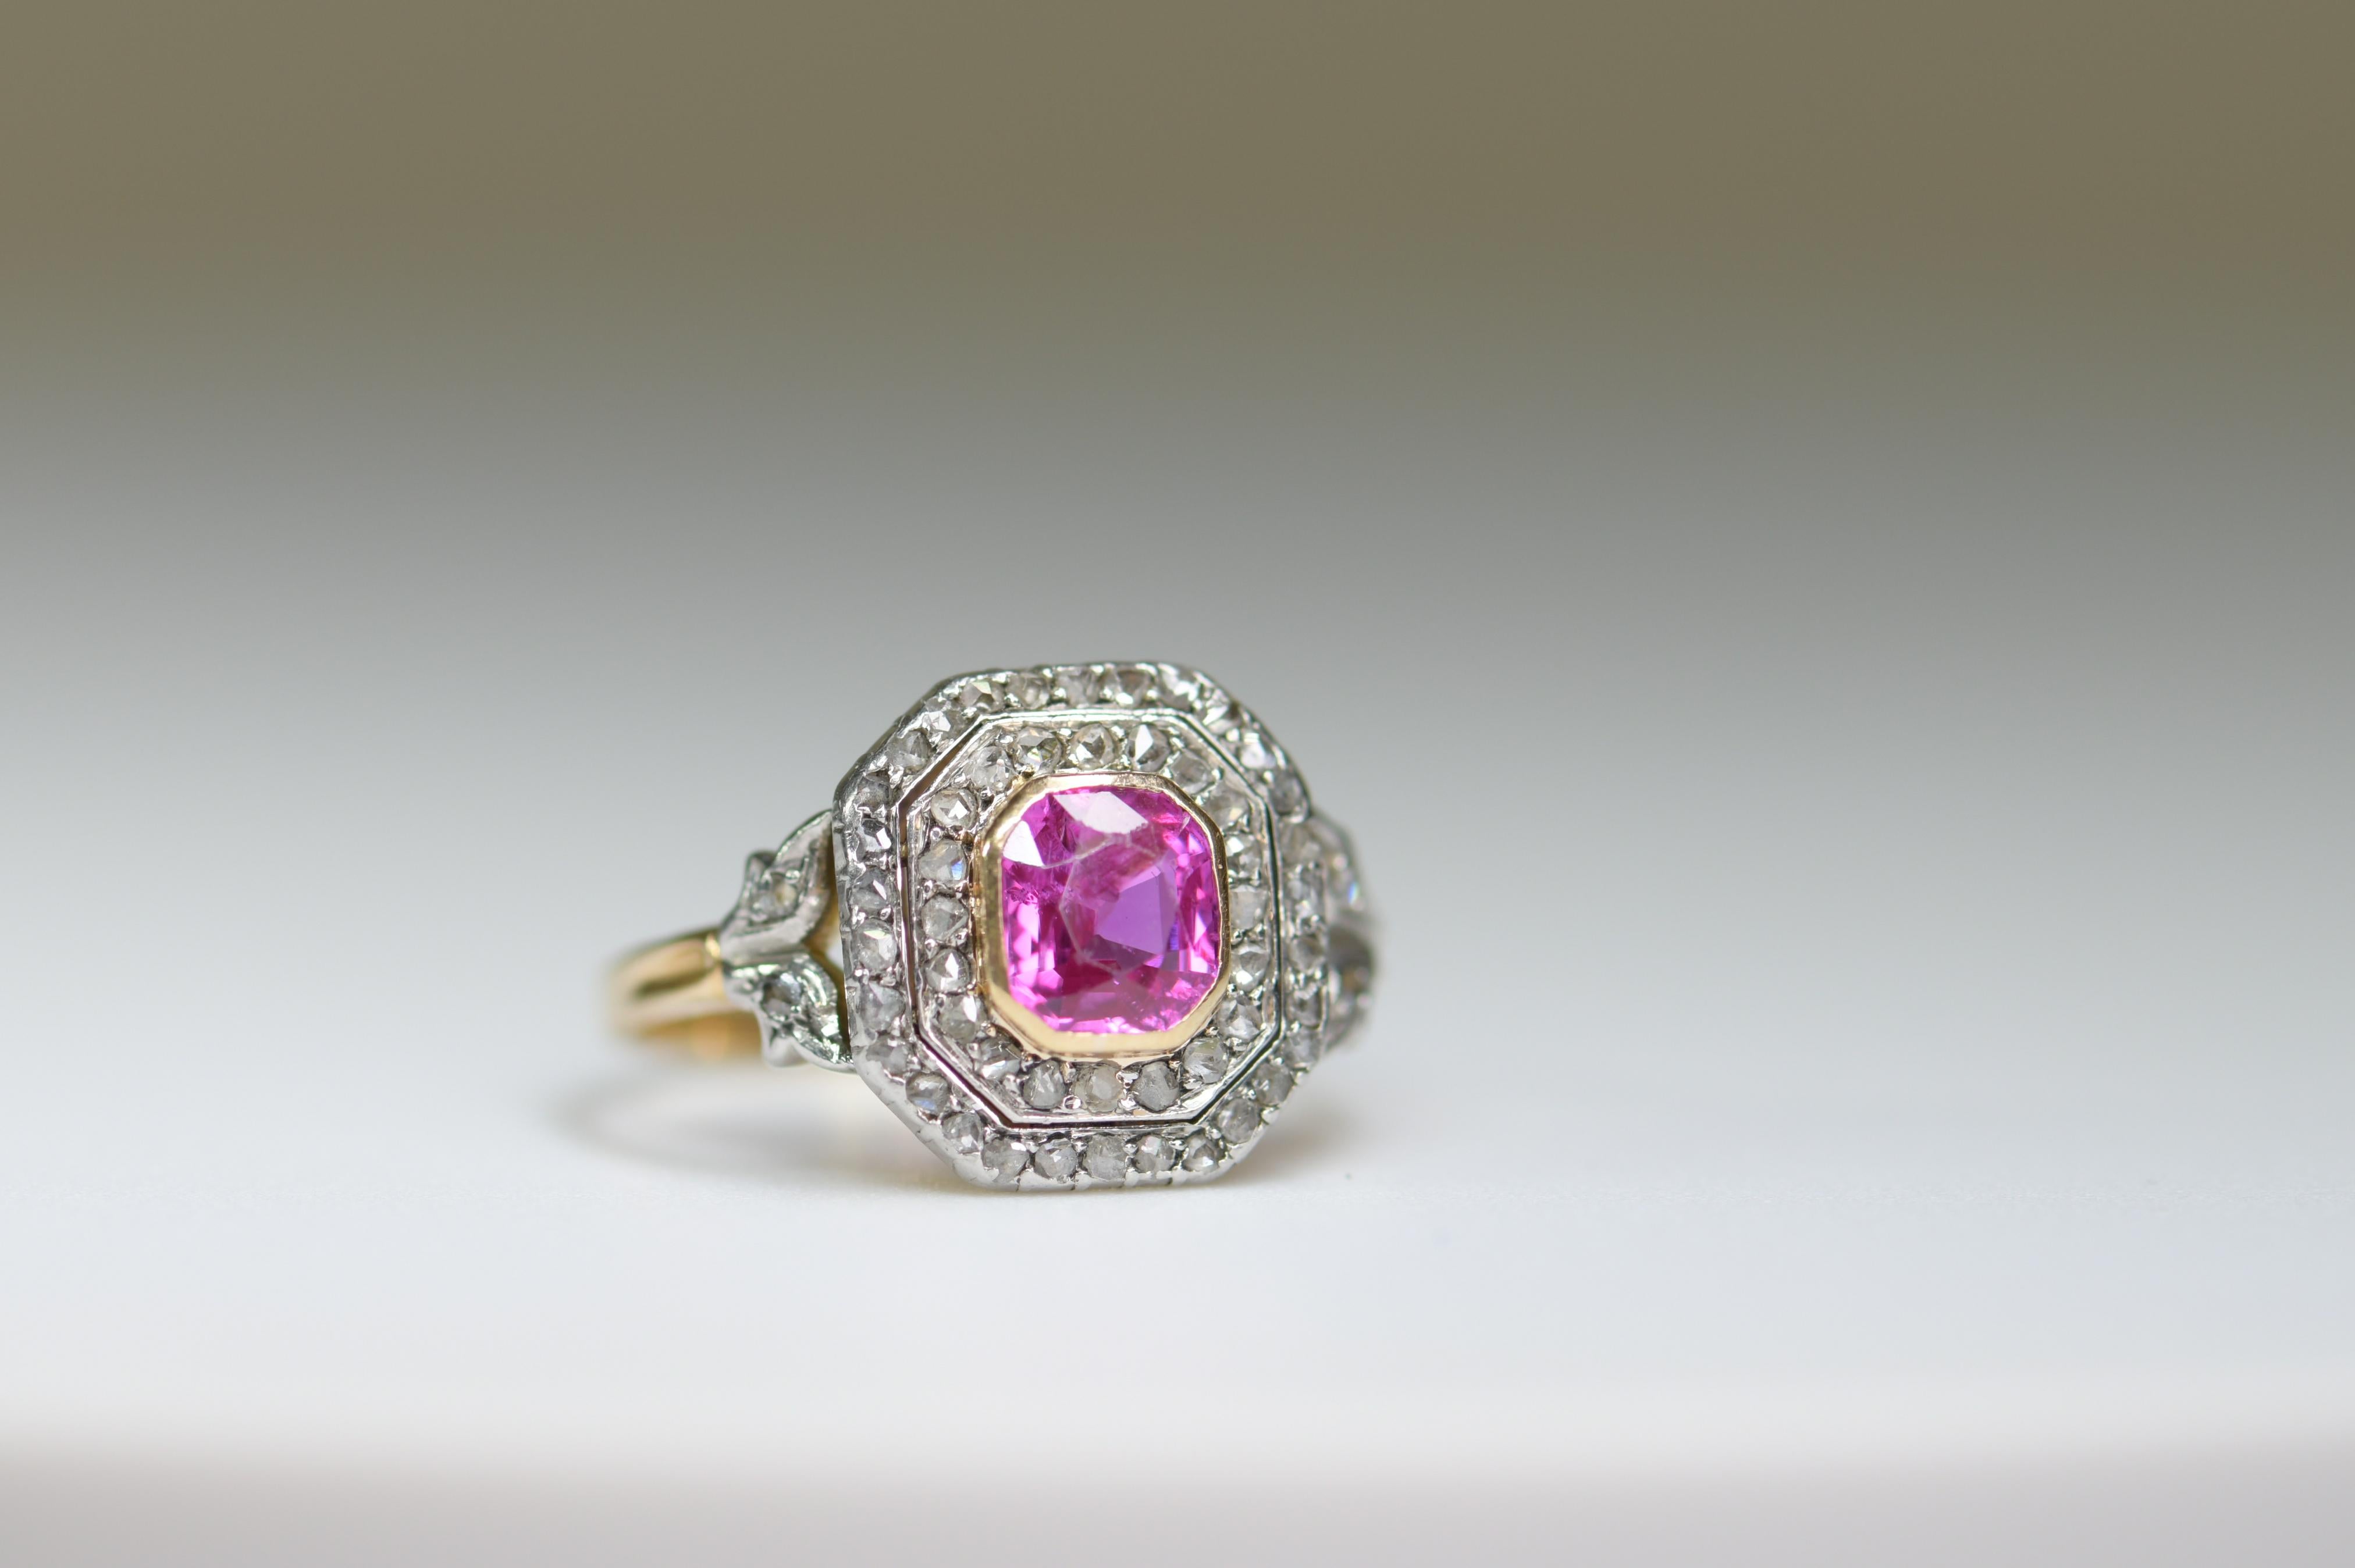 An unusual 18ct gold ring with a platinum top that was made circa 1900-1910. It has been set with a square shaped pink sapphire. It is surrounded by set with two rows of rose-cut diamonds, also seamed shoulders foliage of roses. It sits low on the